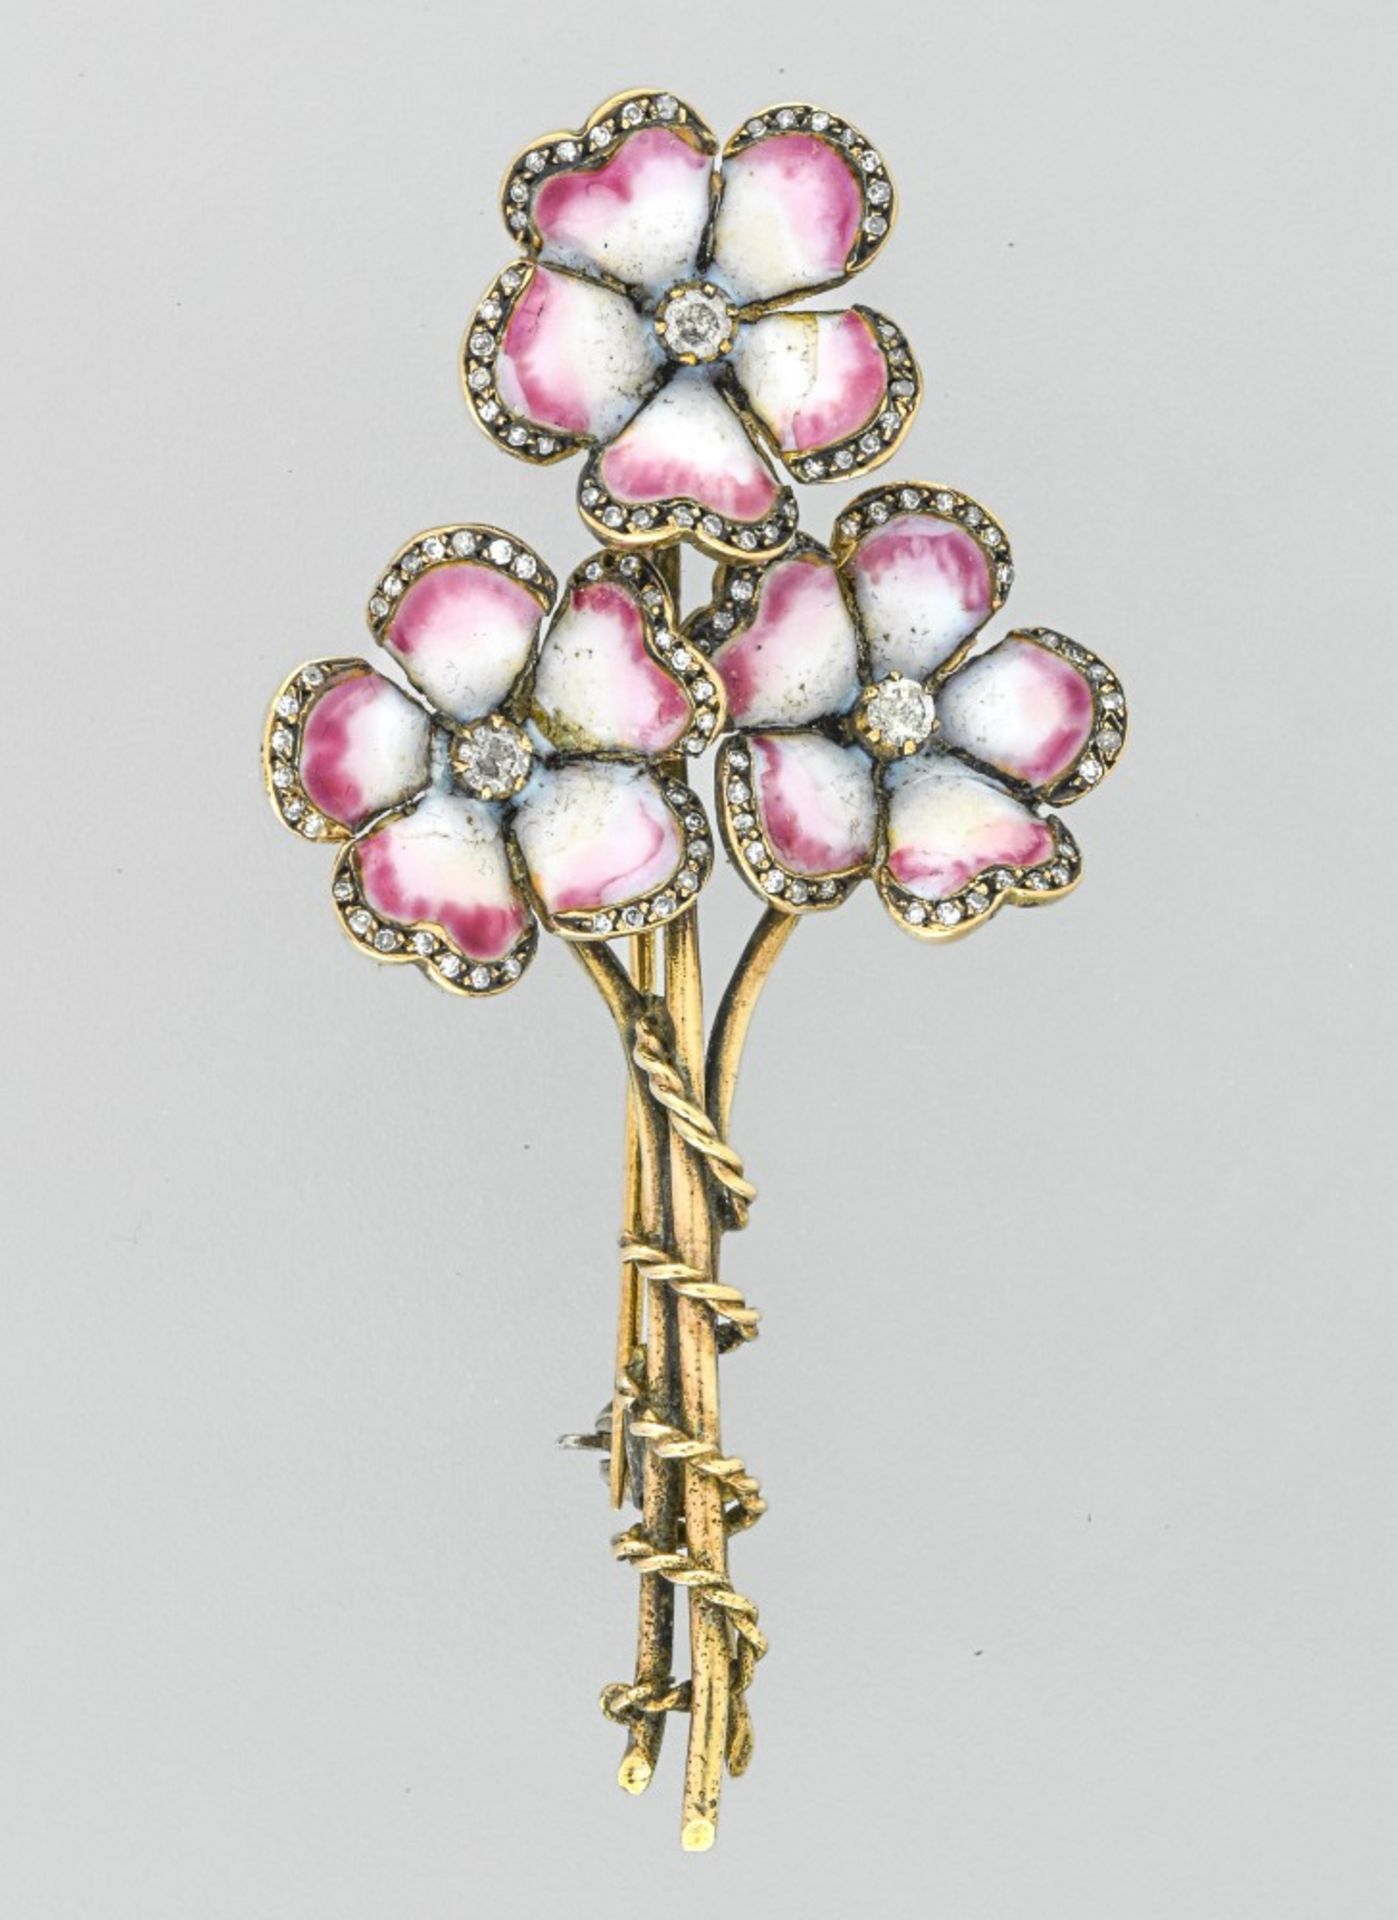 Three flowers enamel and diamonds brooch In yellow and white gold 9 Karat, enamel and old cut